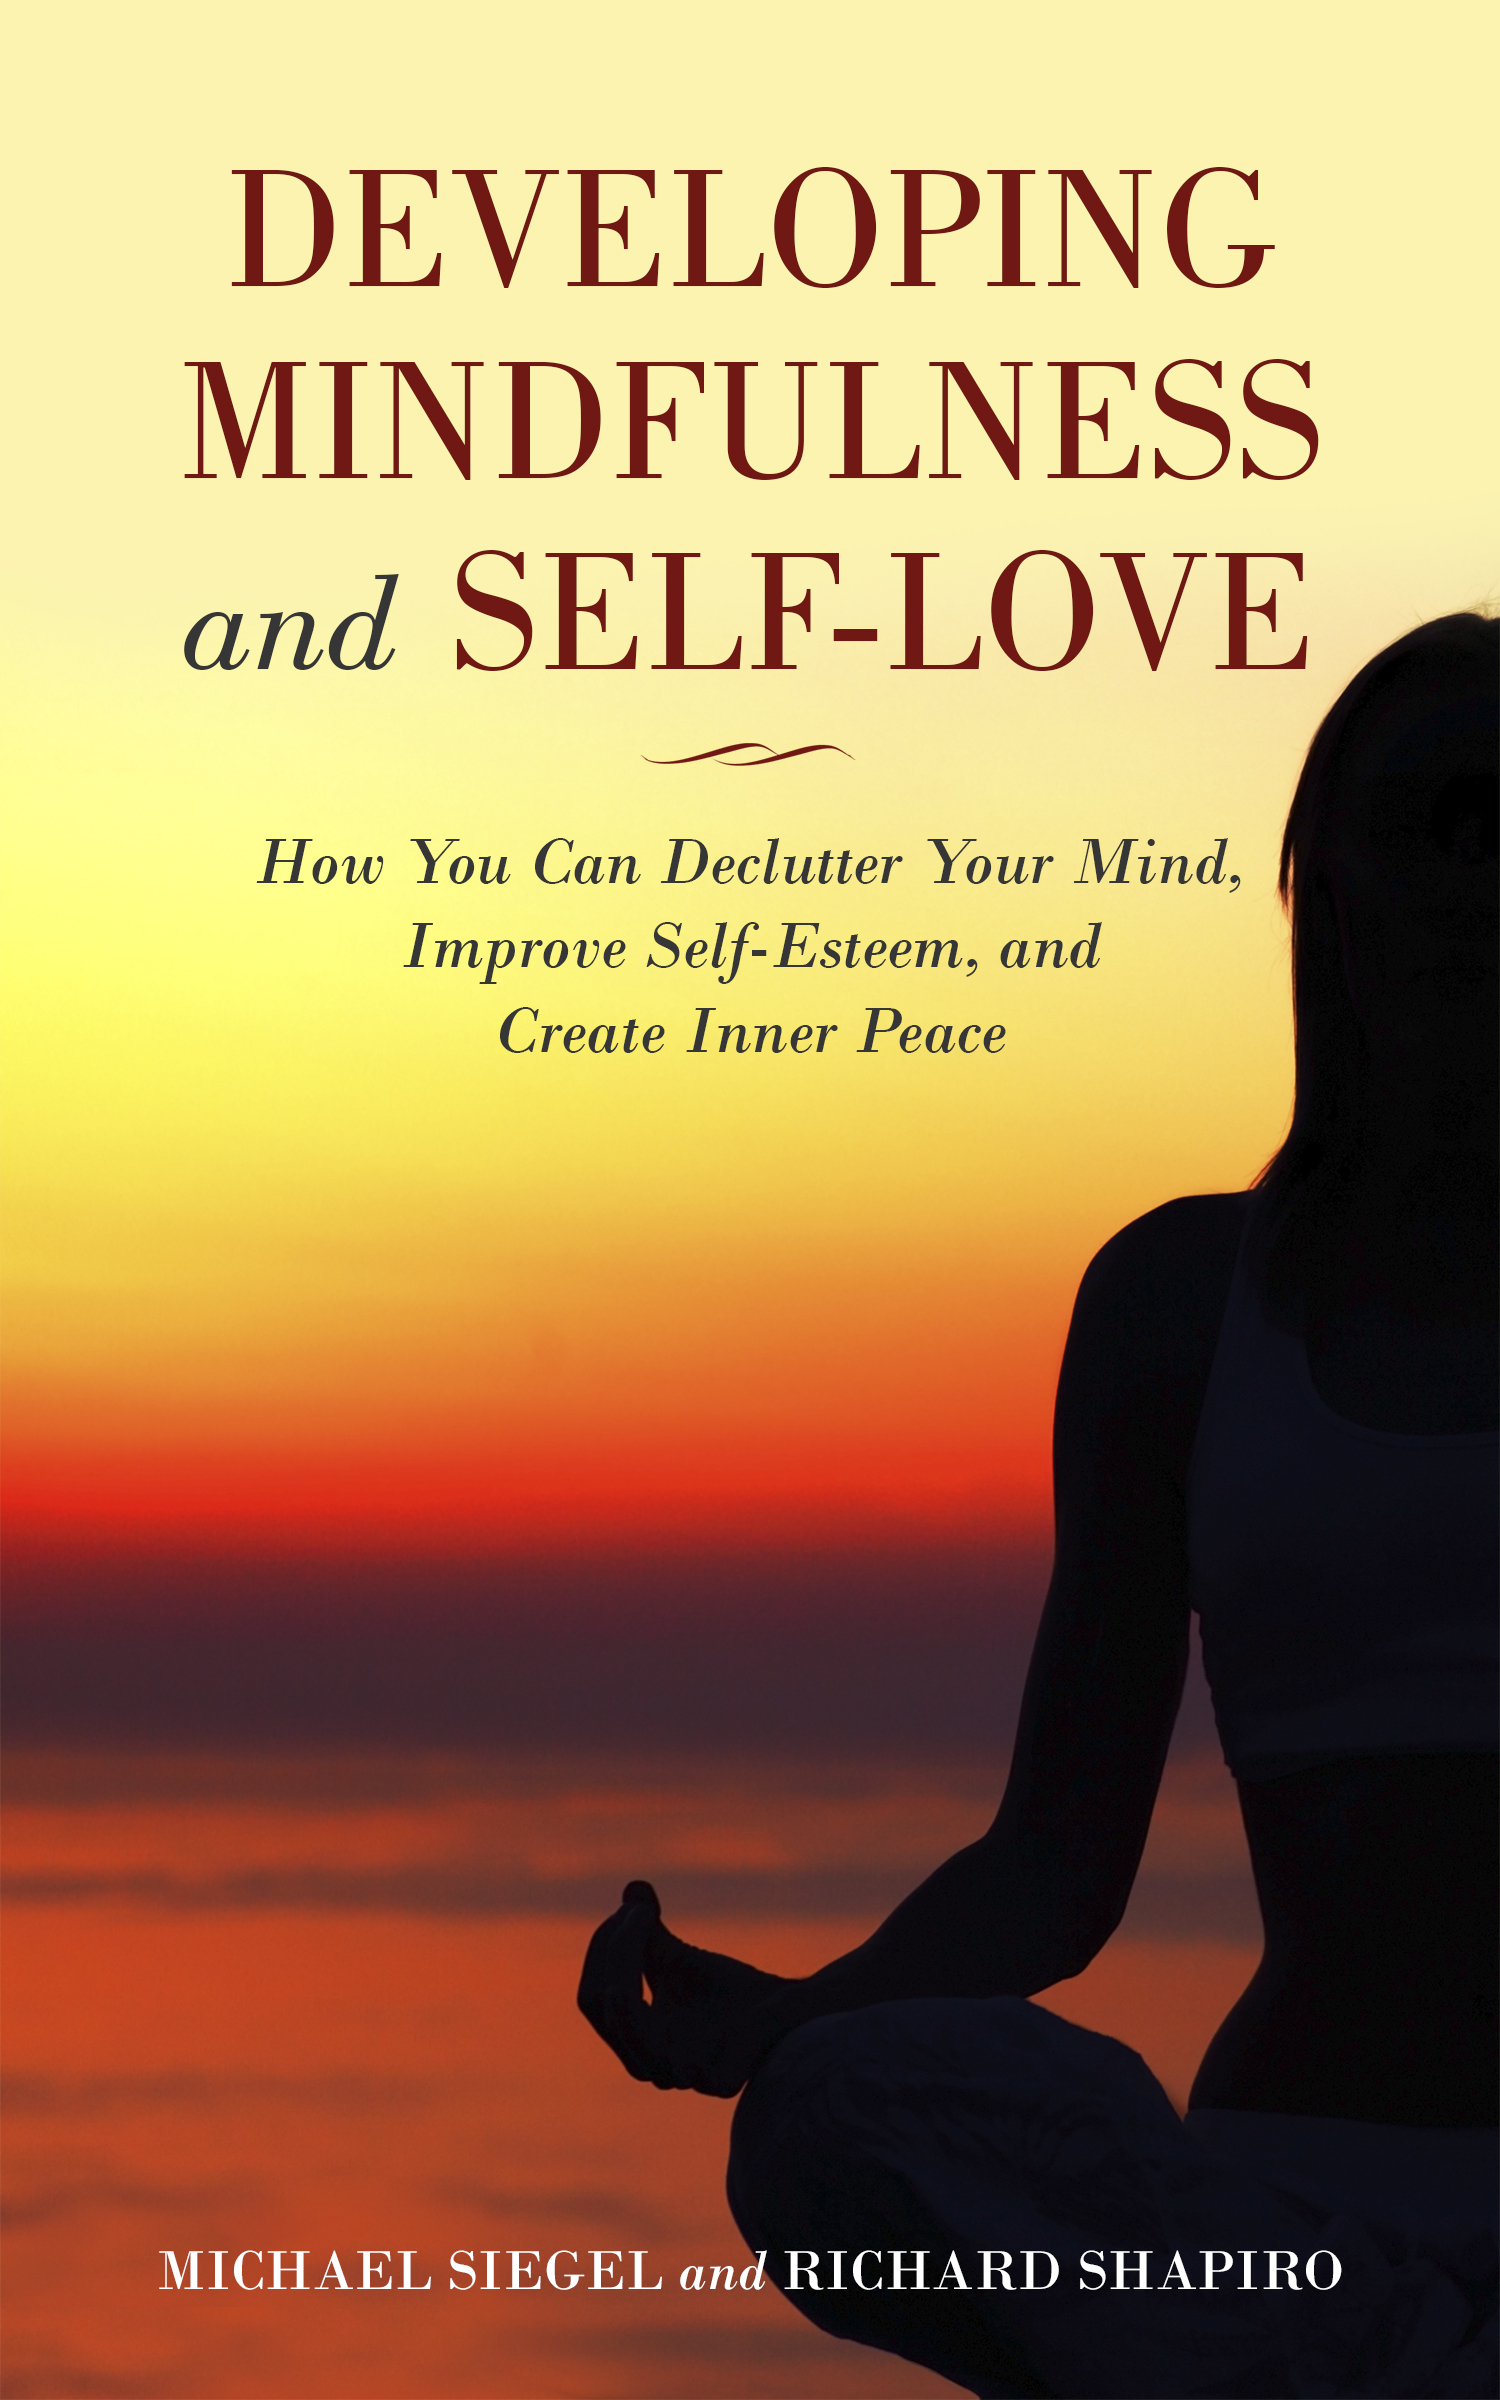 FREE: Developing Mindfulness and Self-Love: How You Can Declutter Your Mind, Improve Self-Esteem, and Create Inner Peace RIGHT NOW by Michael Siegel, Richard Shapiro